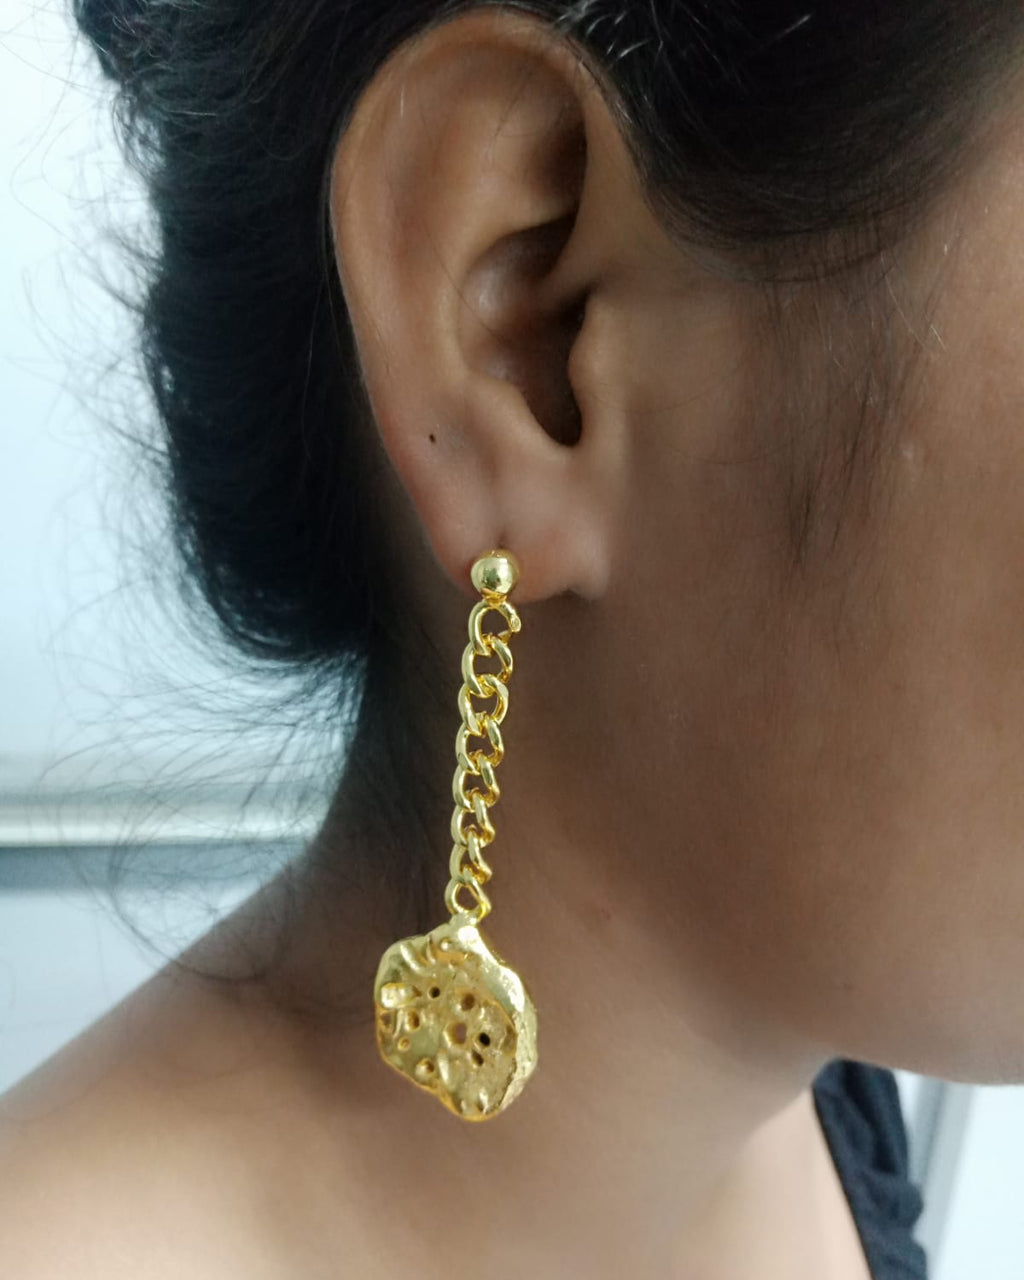 Details more than 246 gold chain earrings design